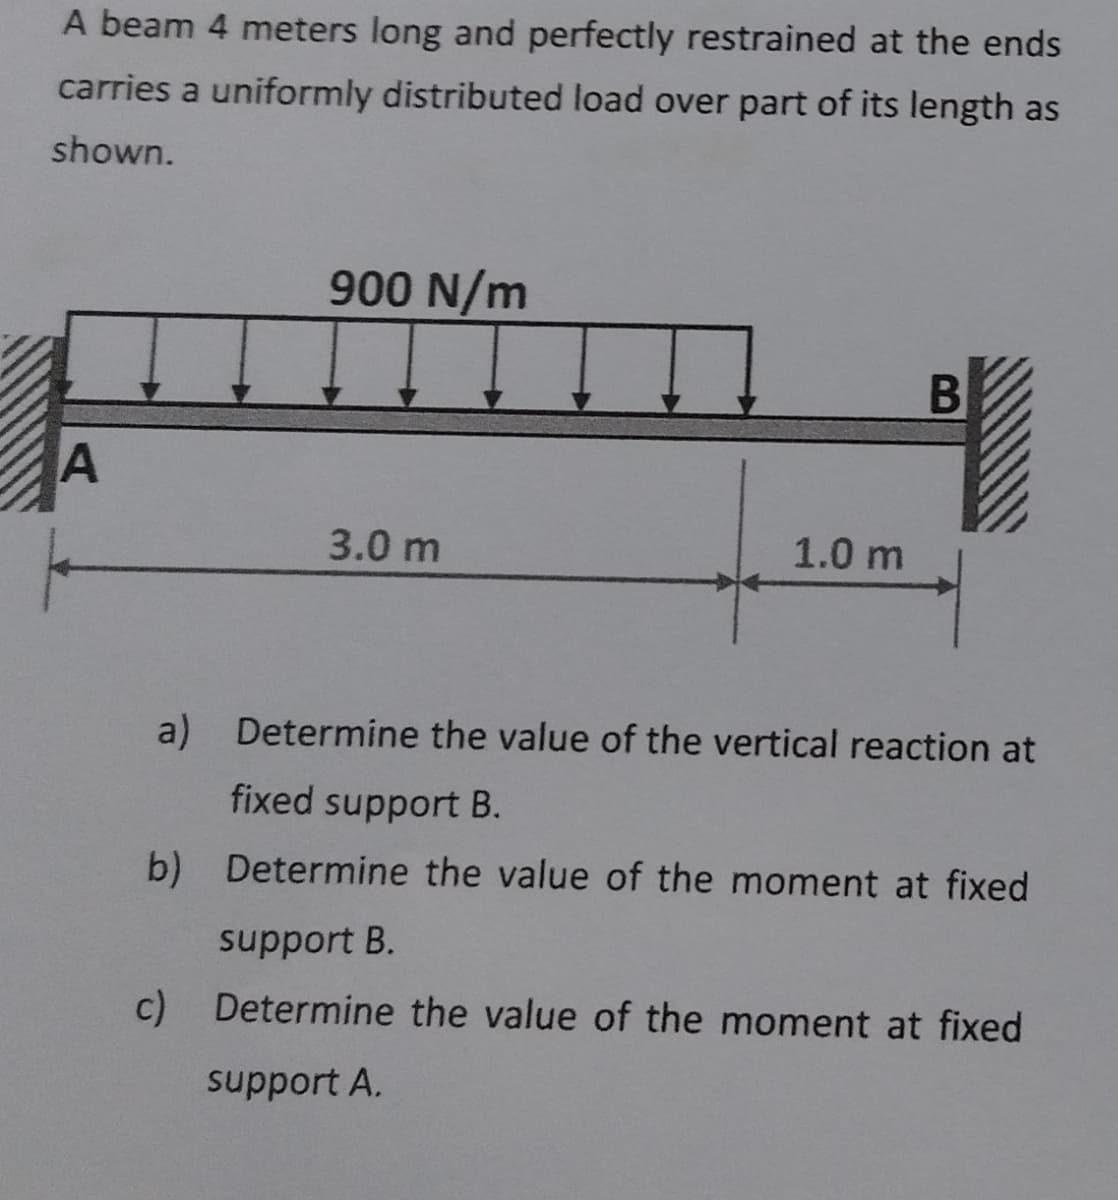 A beam 4 meters long and perfectly restrained at the ends
carries a uniformly distributed load over part of its length as
shown.
900 N/m
A
3.0 m
1.0 m
B
a)
Determine the value of the vertical reaction at
fixed support B.
b) Determine the value of the moment at fixed
support B.
c) Determine the value of the moment at fixed
support A.